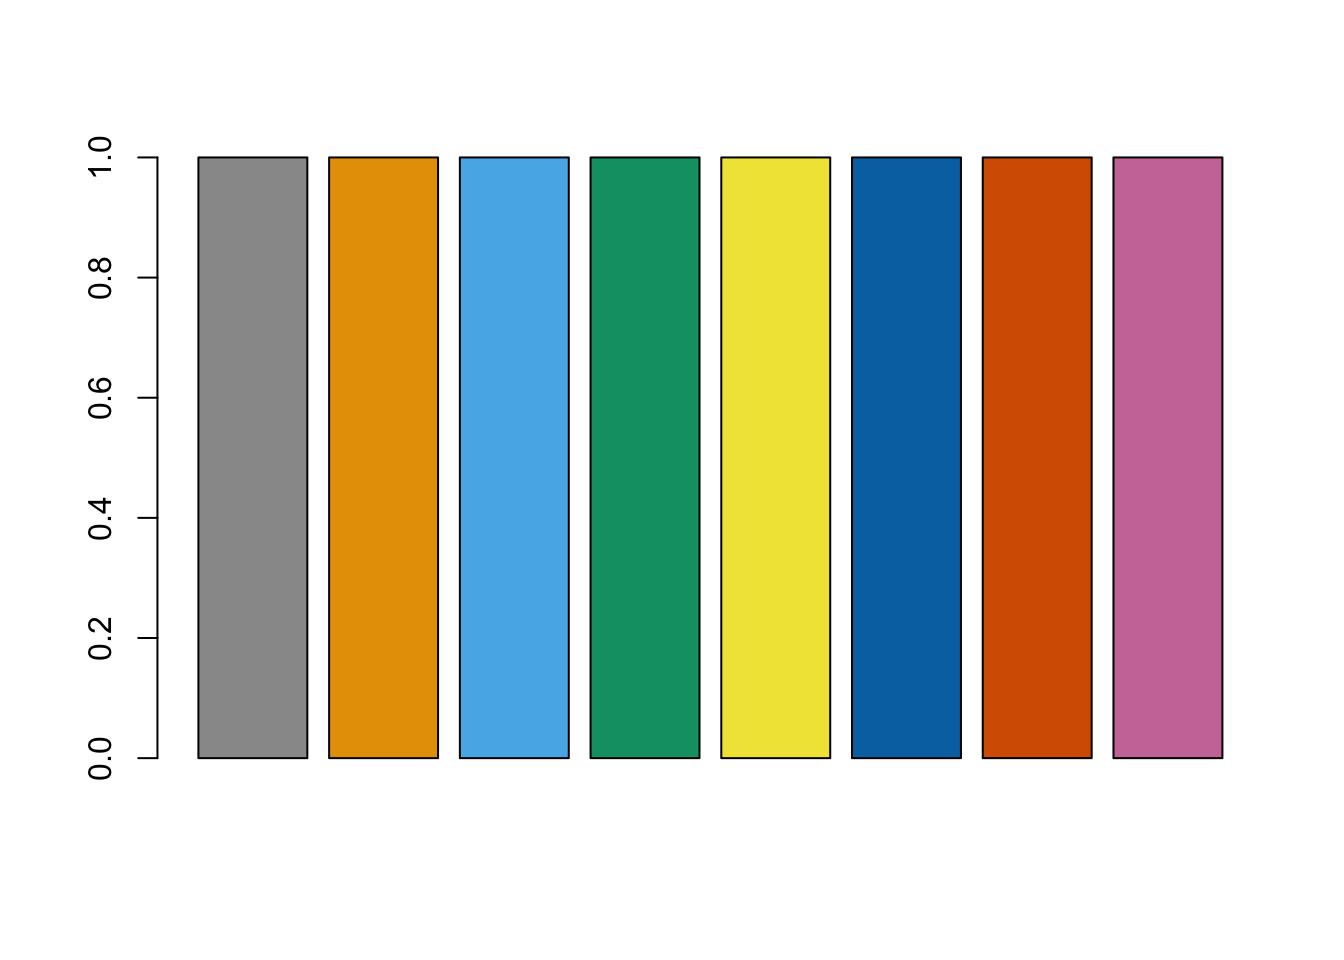 A barplot using the color-blind friendly palettes recommended by Color Universal Design.